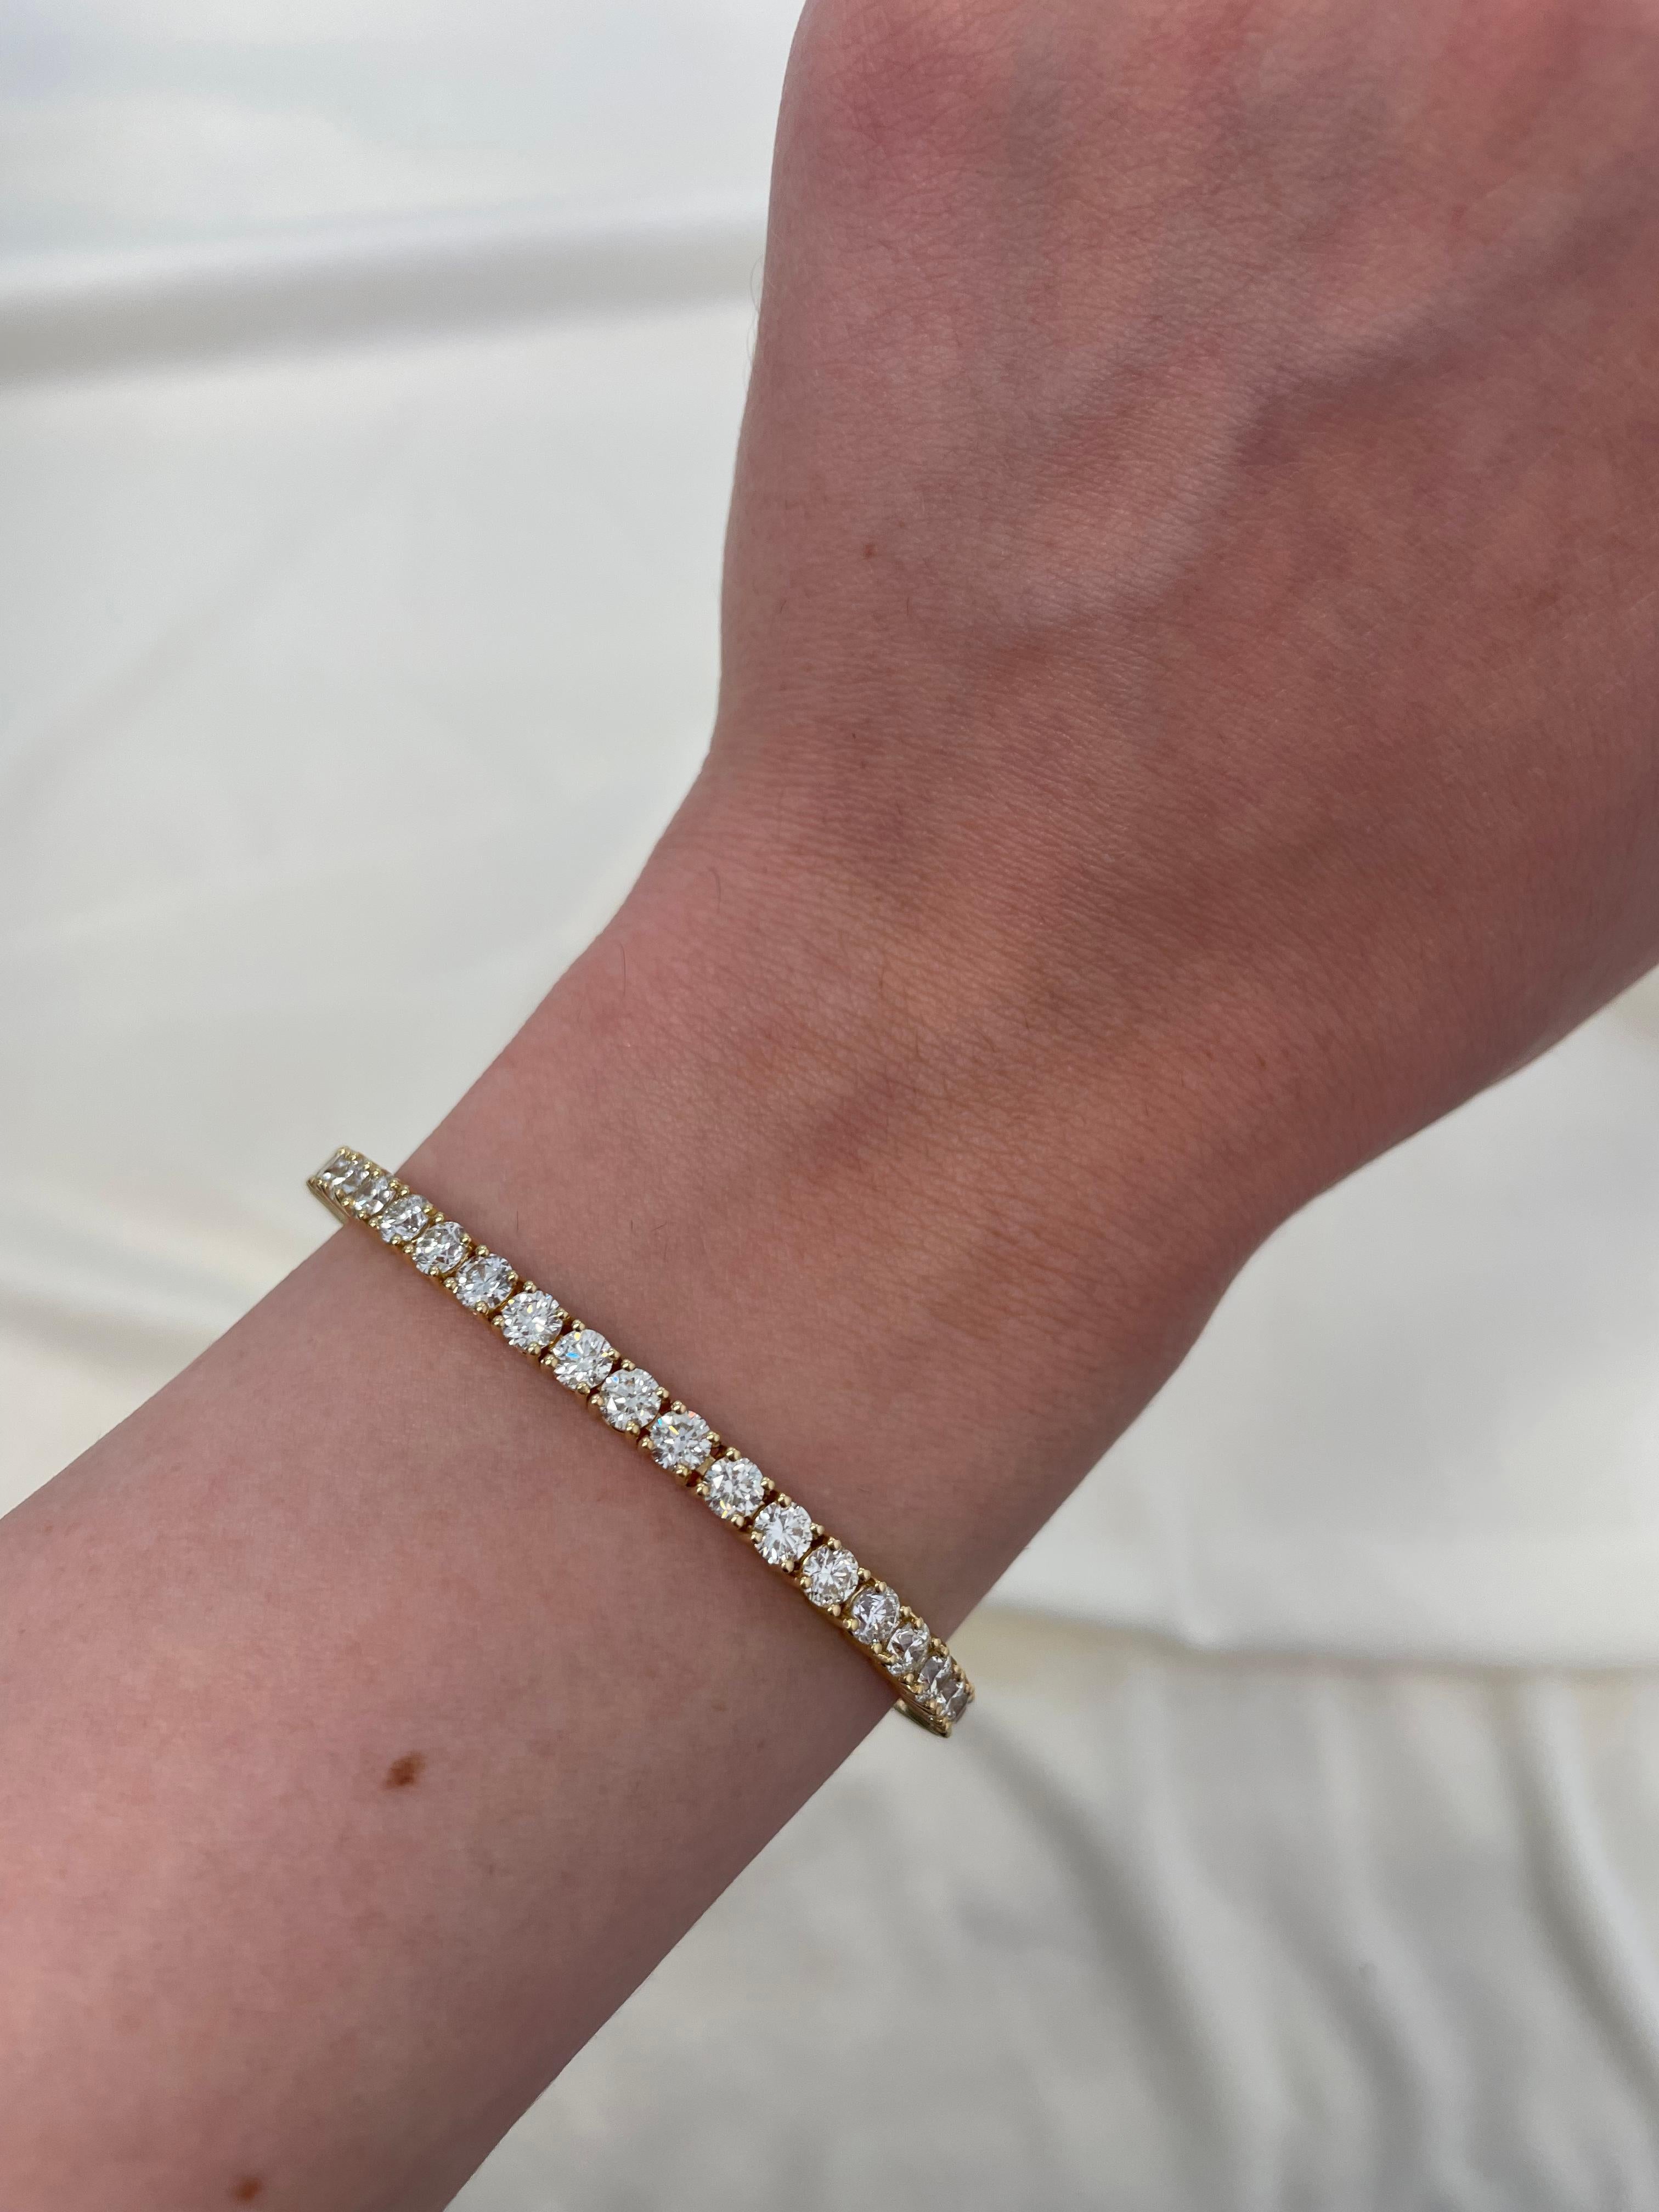 Exquisite and timeless diamonds tennis bracelet, by Alexander Beverly Hills.
49 round brilliant diamonds, 8.78 carats total. Approximately H-J color and VS clarity. Four prong set in 18k yellow gold, 16.38 grams, 7 inches. 
Accommodated with an